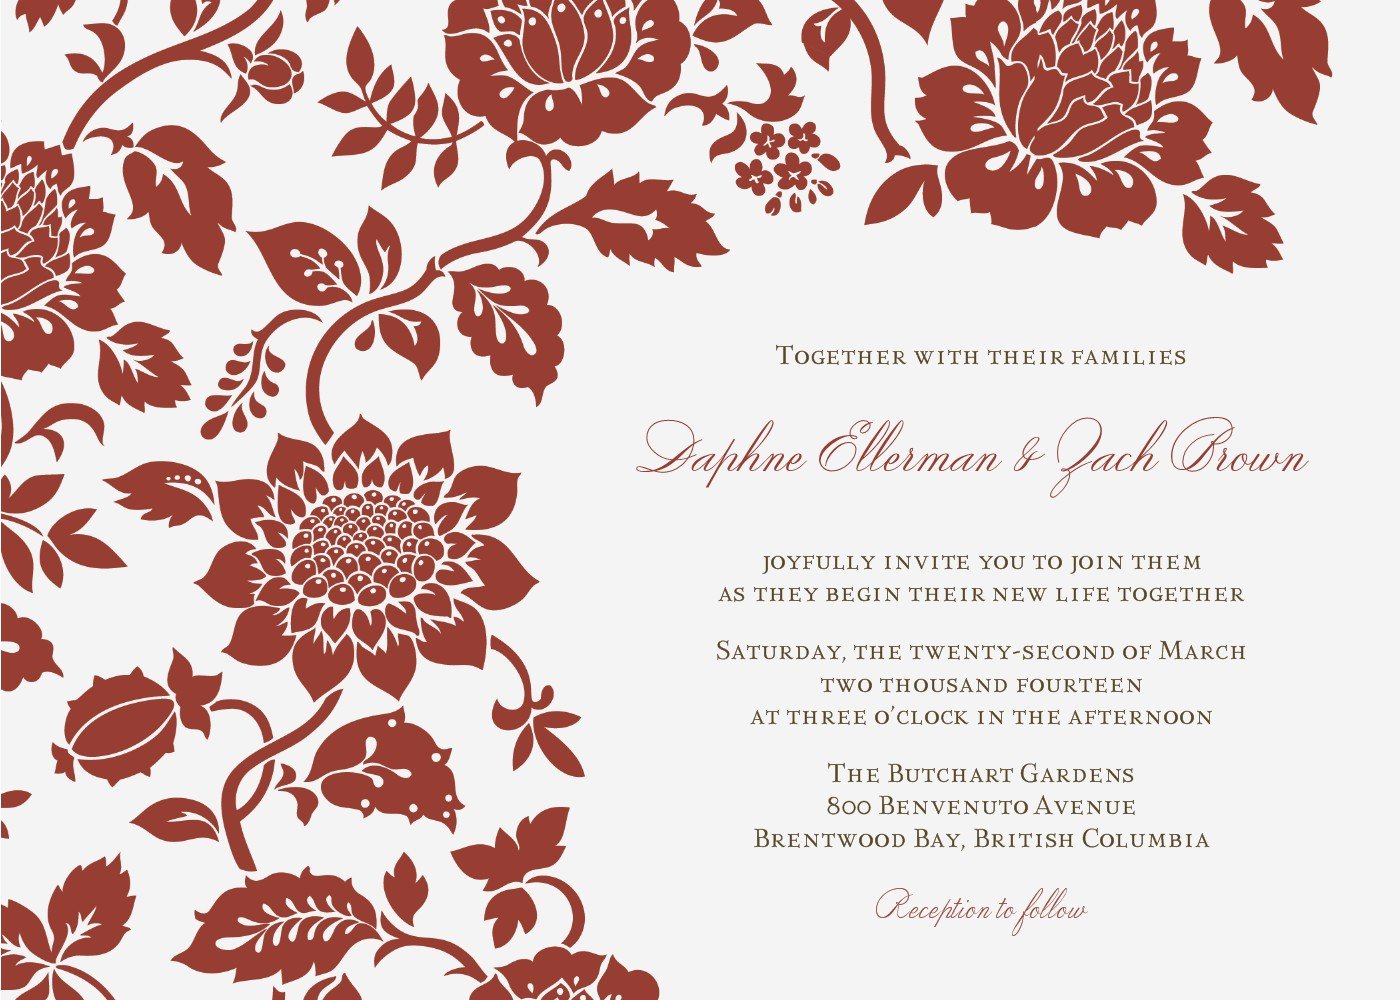 Wedding Invitation Email Template